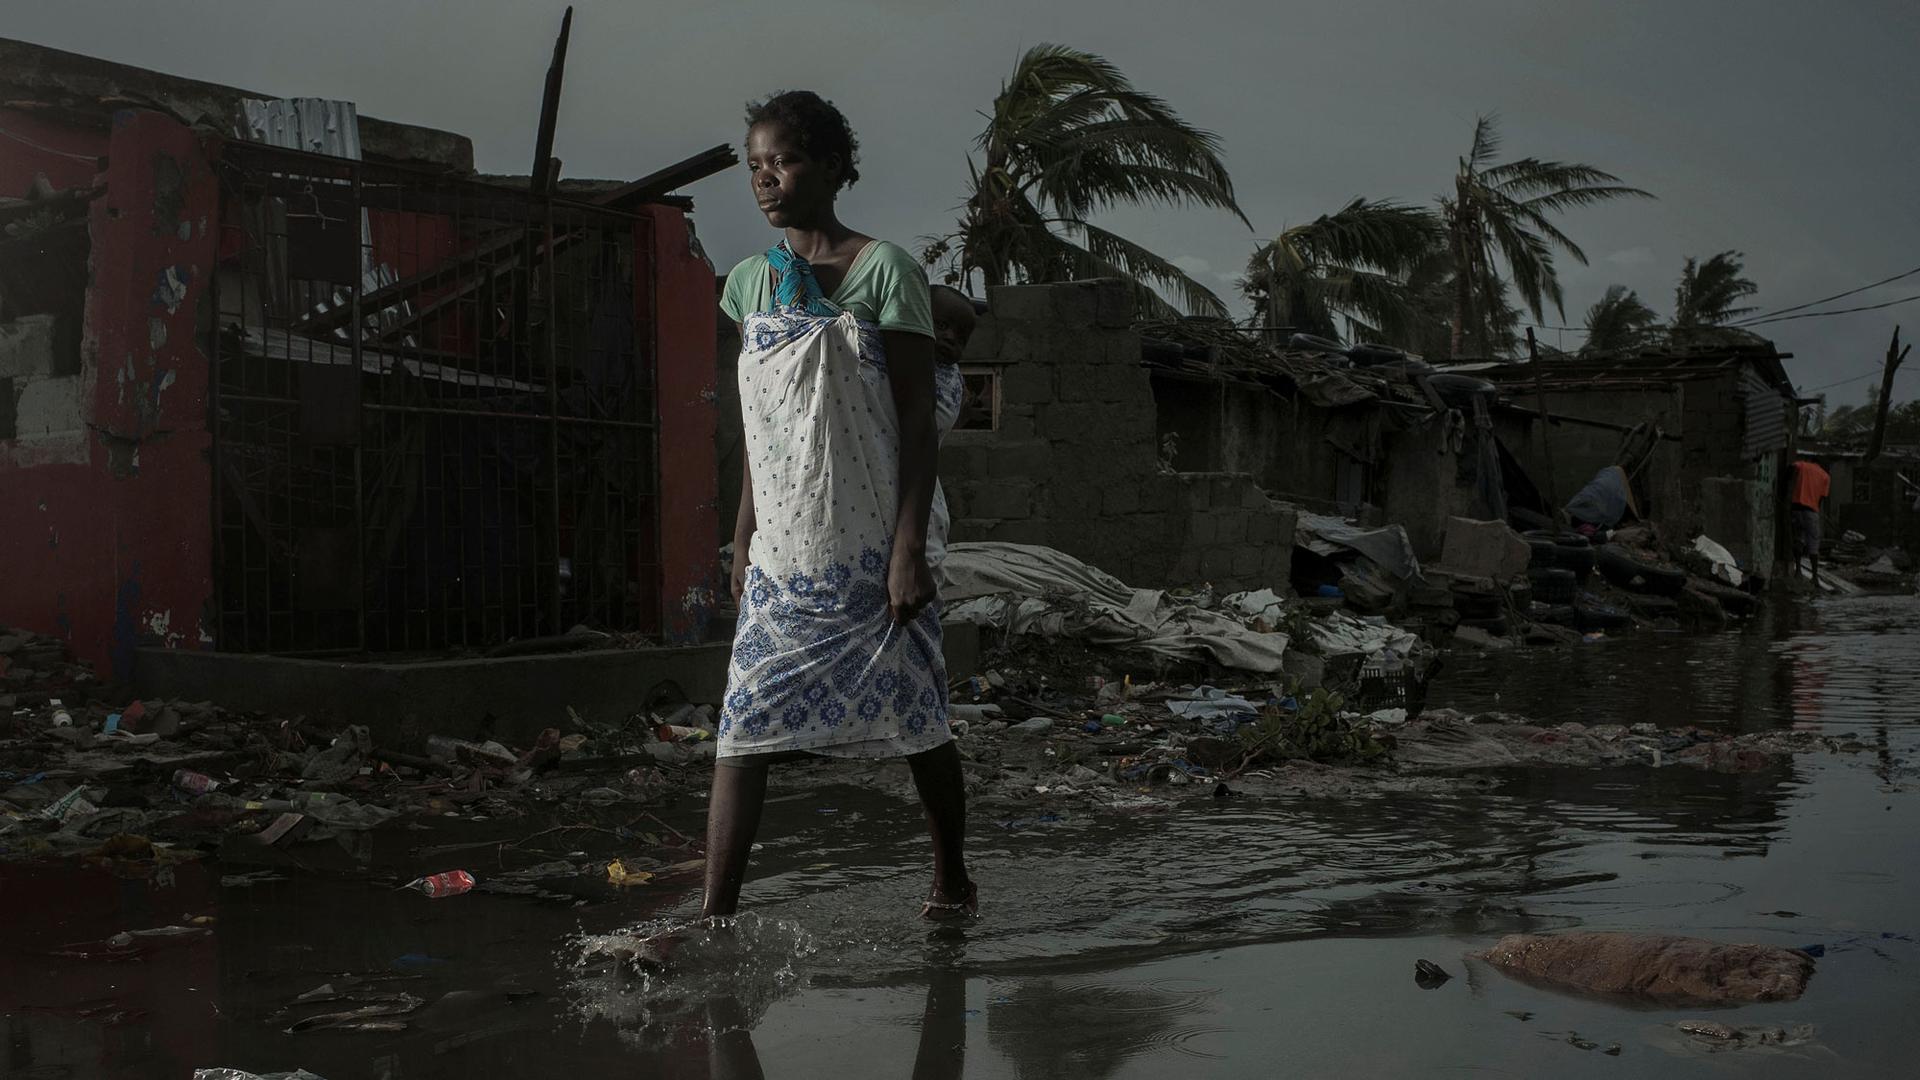 A woman is shown in ankle deep water walks down a flooded road with heavily damaged buildings in the background.